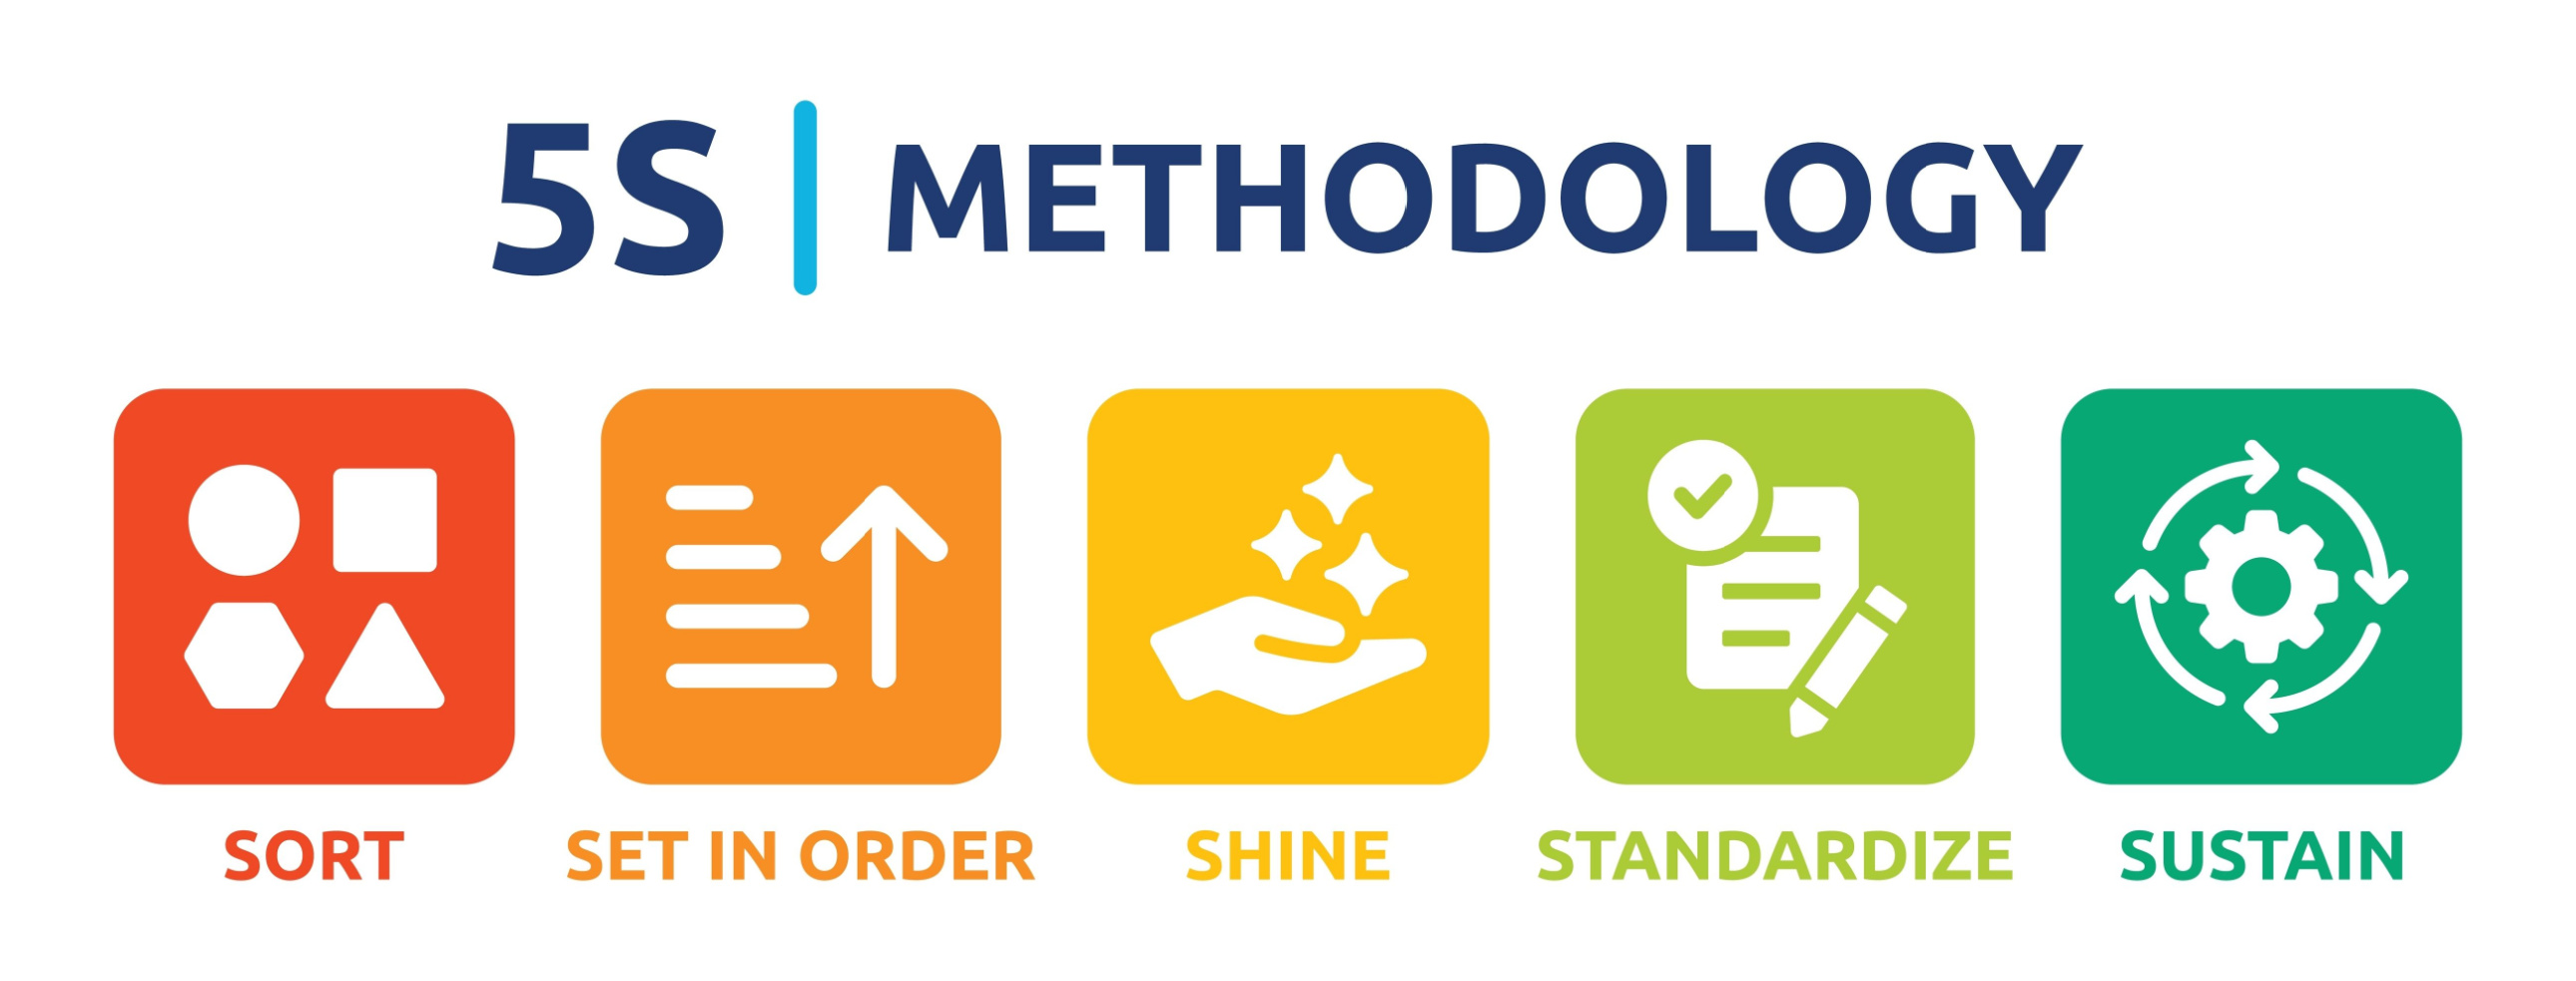 Graphic of the 5S methodology: sort, set in order, shine, standardize and sustain.